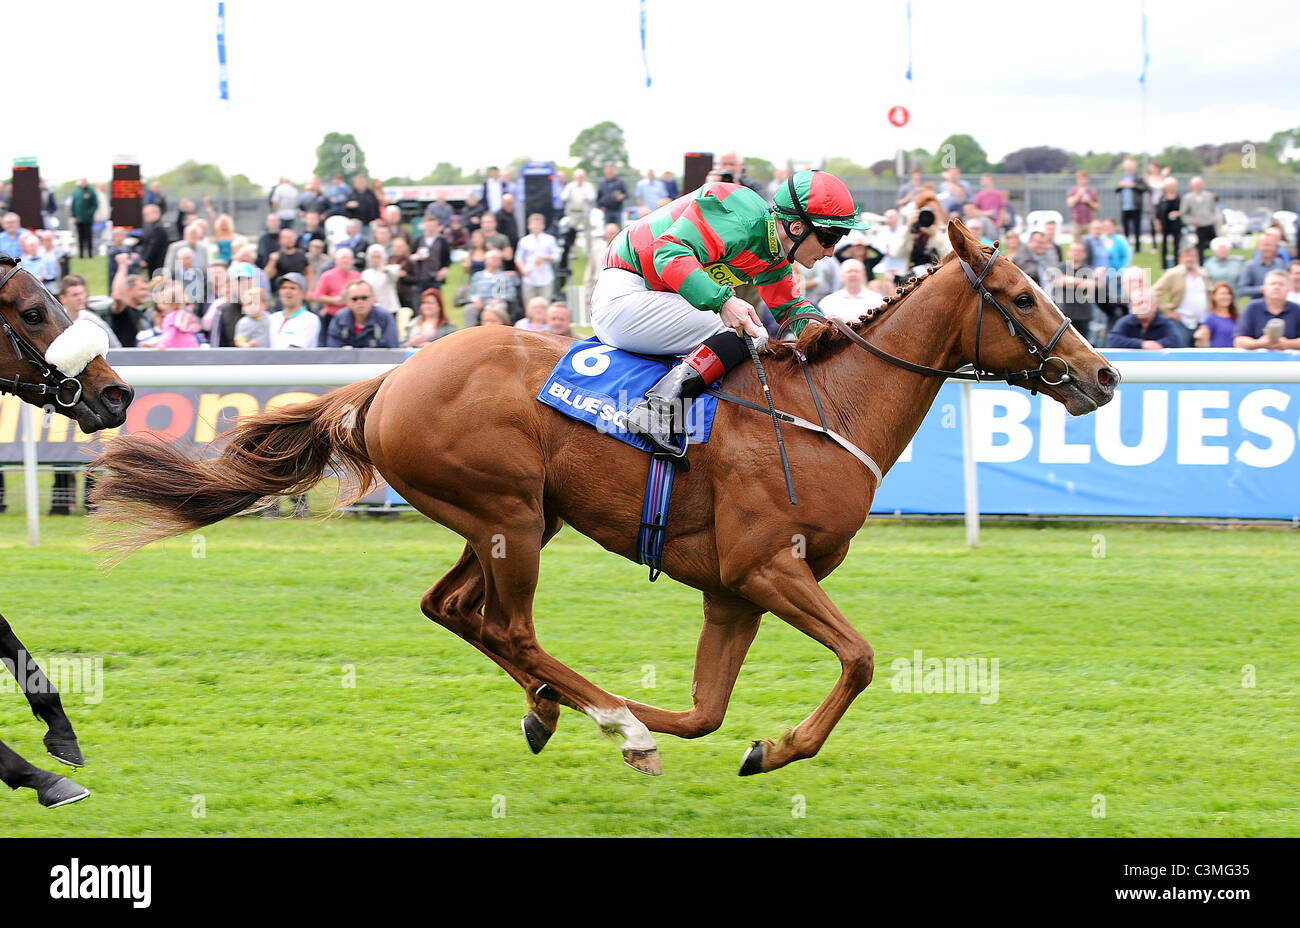 COMMON TOUCH RIDDEN BY FREDERI THE DOWNLOAD THE BLUE SQUARE I YORK RACECOURSE YORK ENGLAND 11 May 2011 Stock Photo